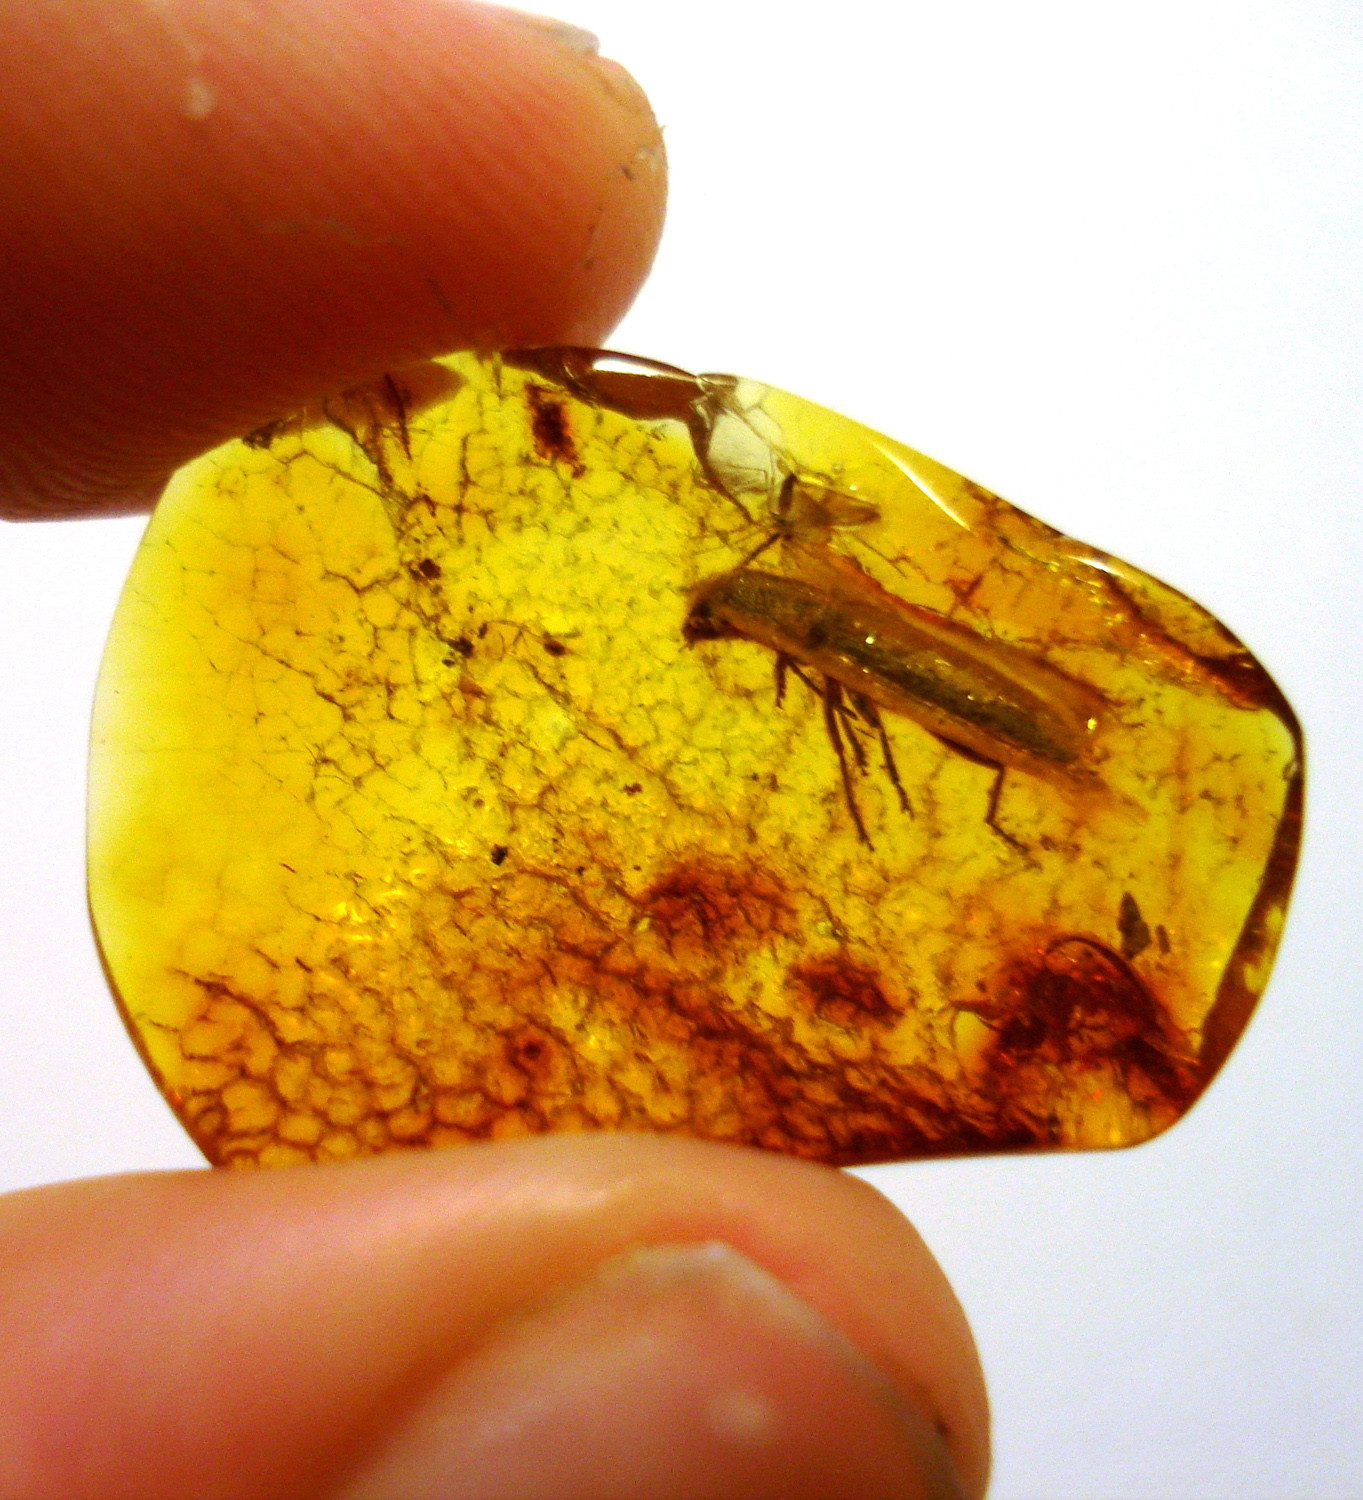 Amber — fossilized resin from various trees — have preserved pieces of nature for millions of years, creating a direct and three-dimensional window into the past.